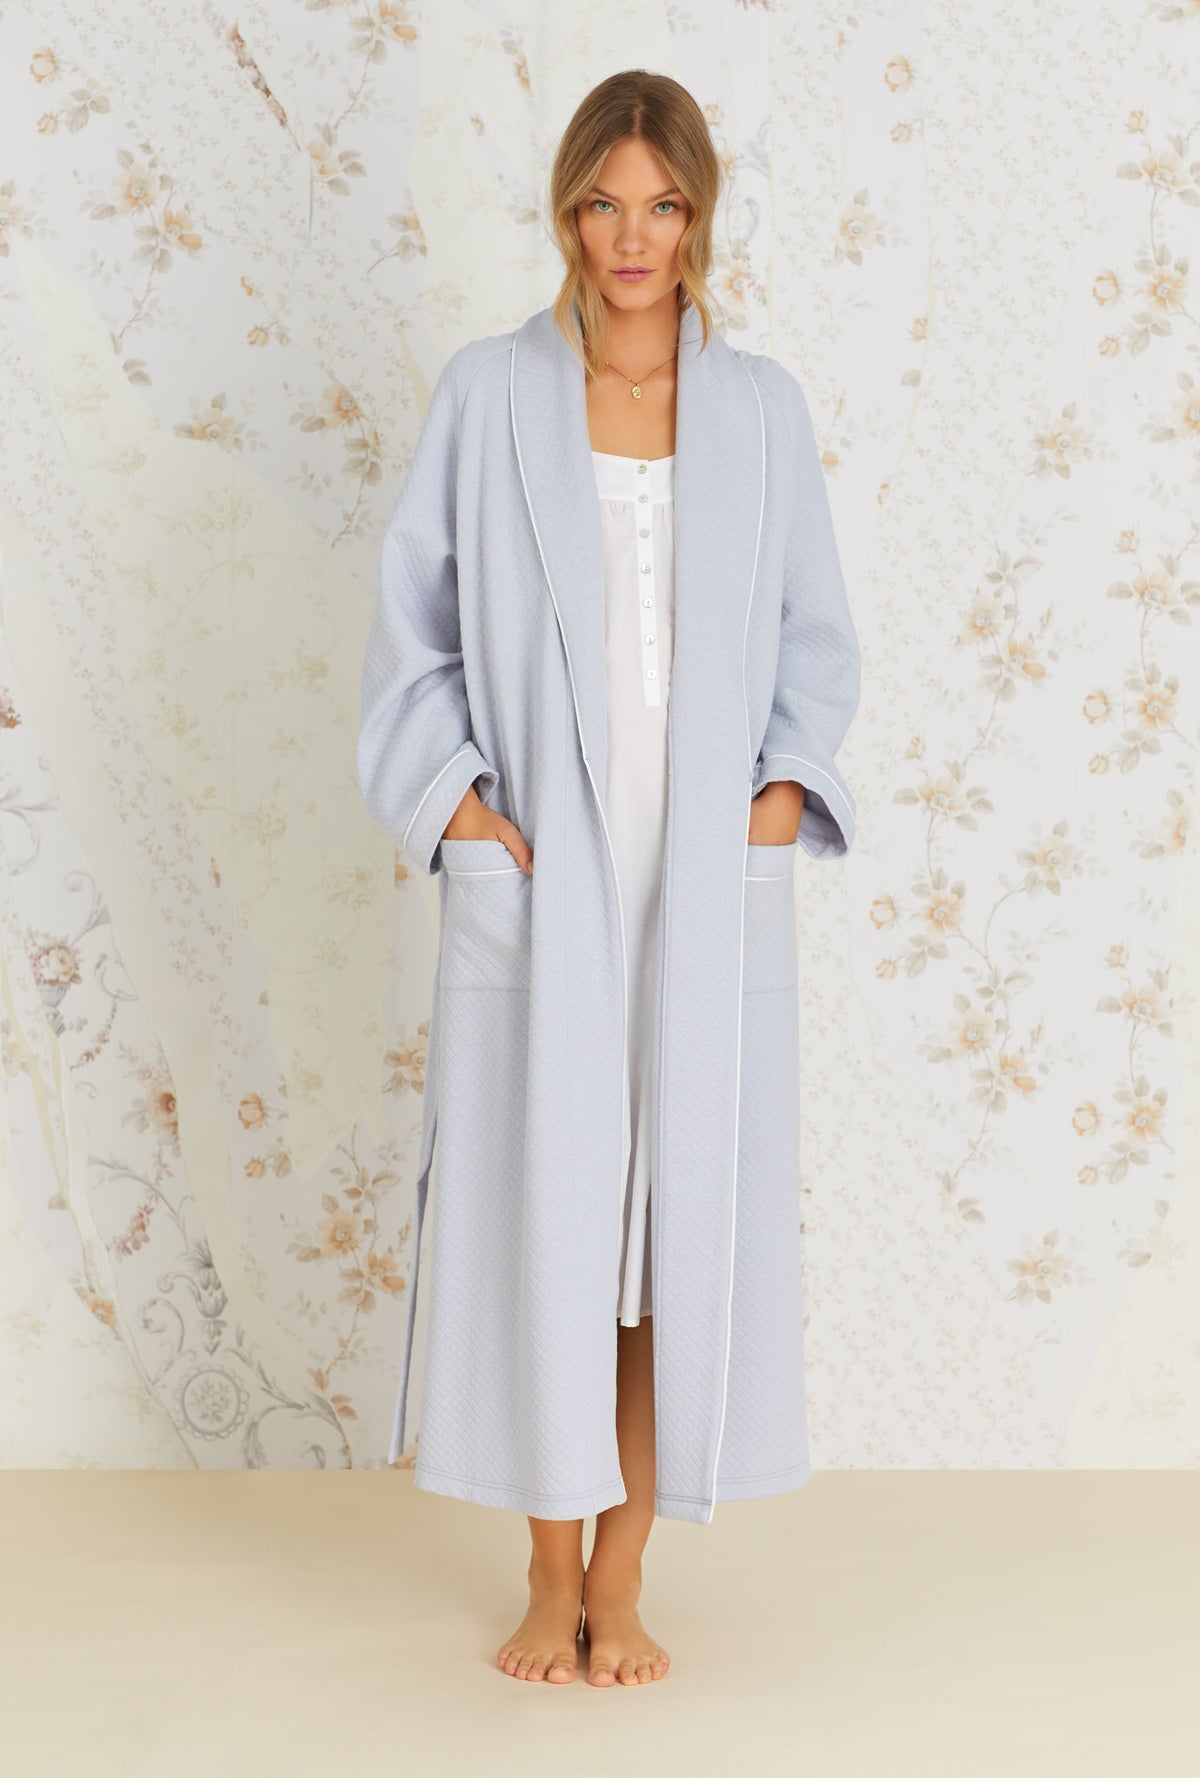 A lady wearing heather grey long sleeve long wrap robe with diamond quilted pattern.